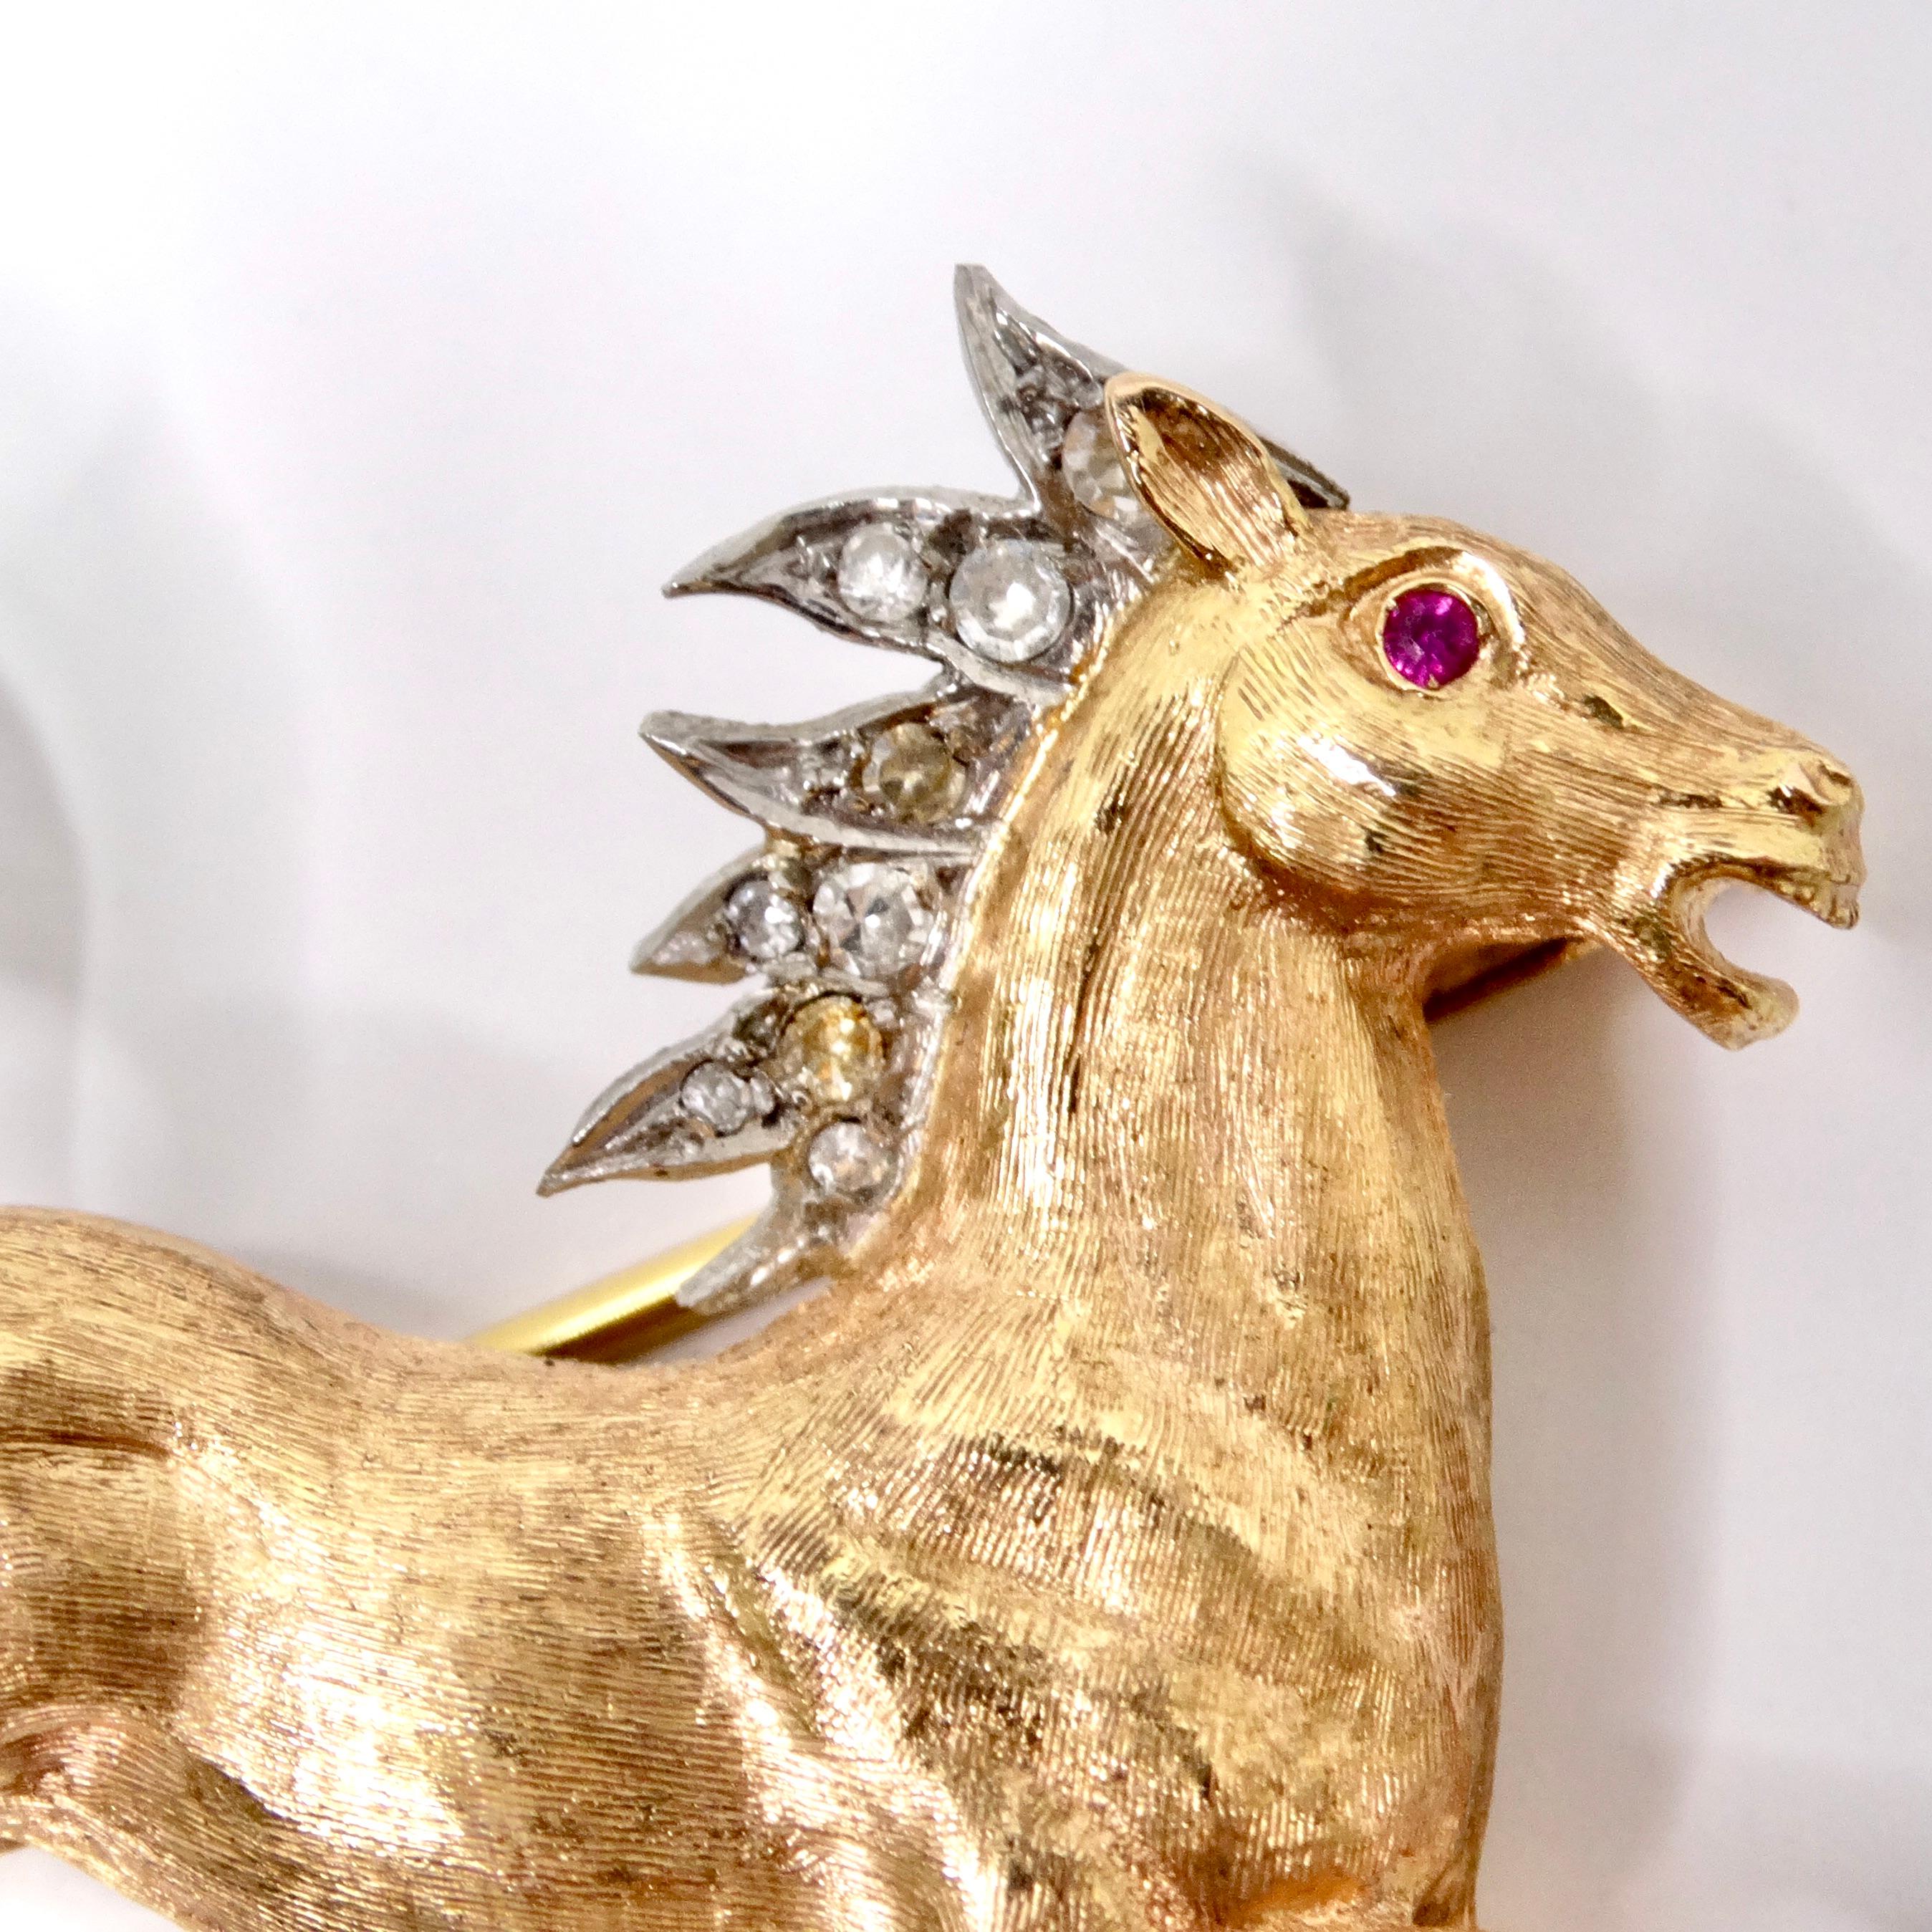 Introducing the exquisite 18K Gold Diamond Horse Pin, a stunning vintage brooch that exudes timeless elegance and luxury. Crafted in the 1940s, this two-tone yellow and white gold running horse brooch is a true masterpiece, adorned with dazzling